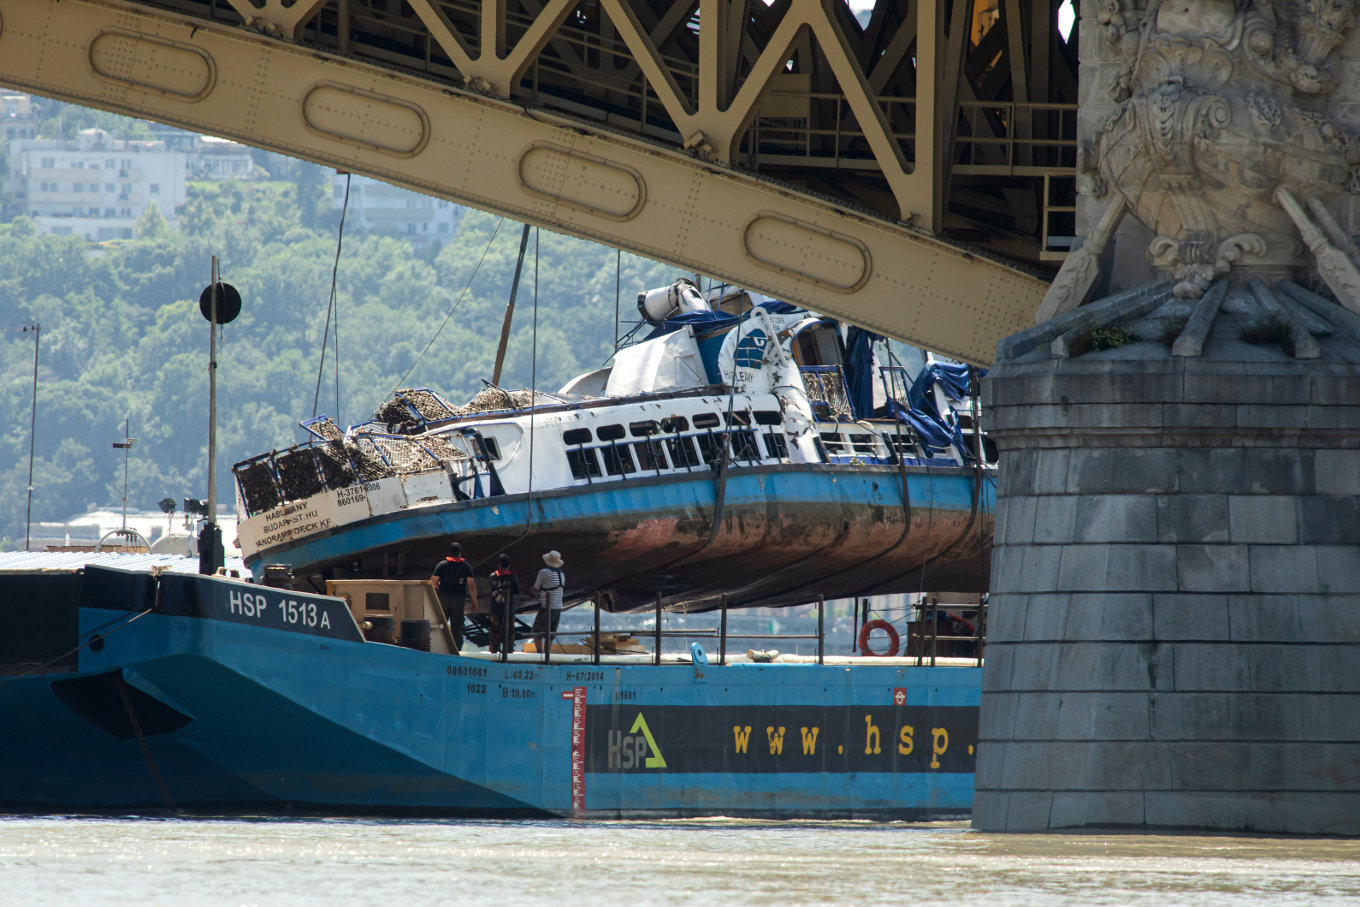 Danube Boat Disaster in Budapest: 1.8 Billion Forints Awarded to Families of Hableány Ship